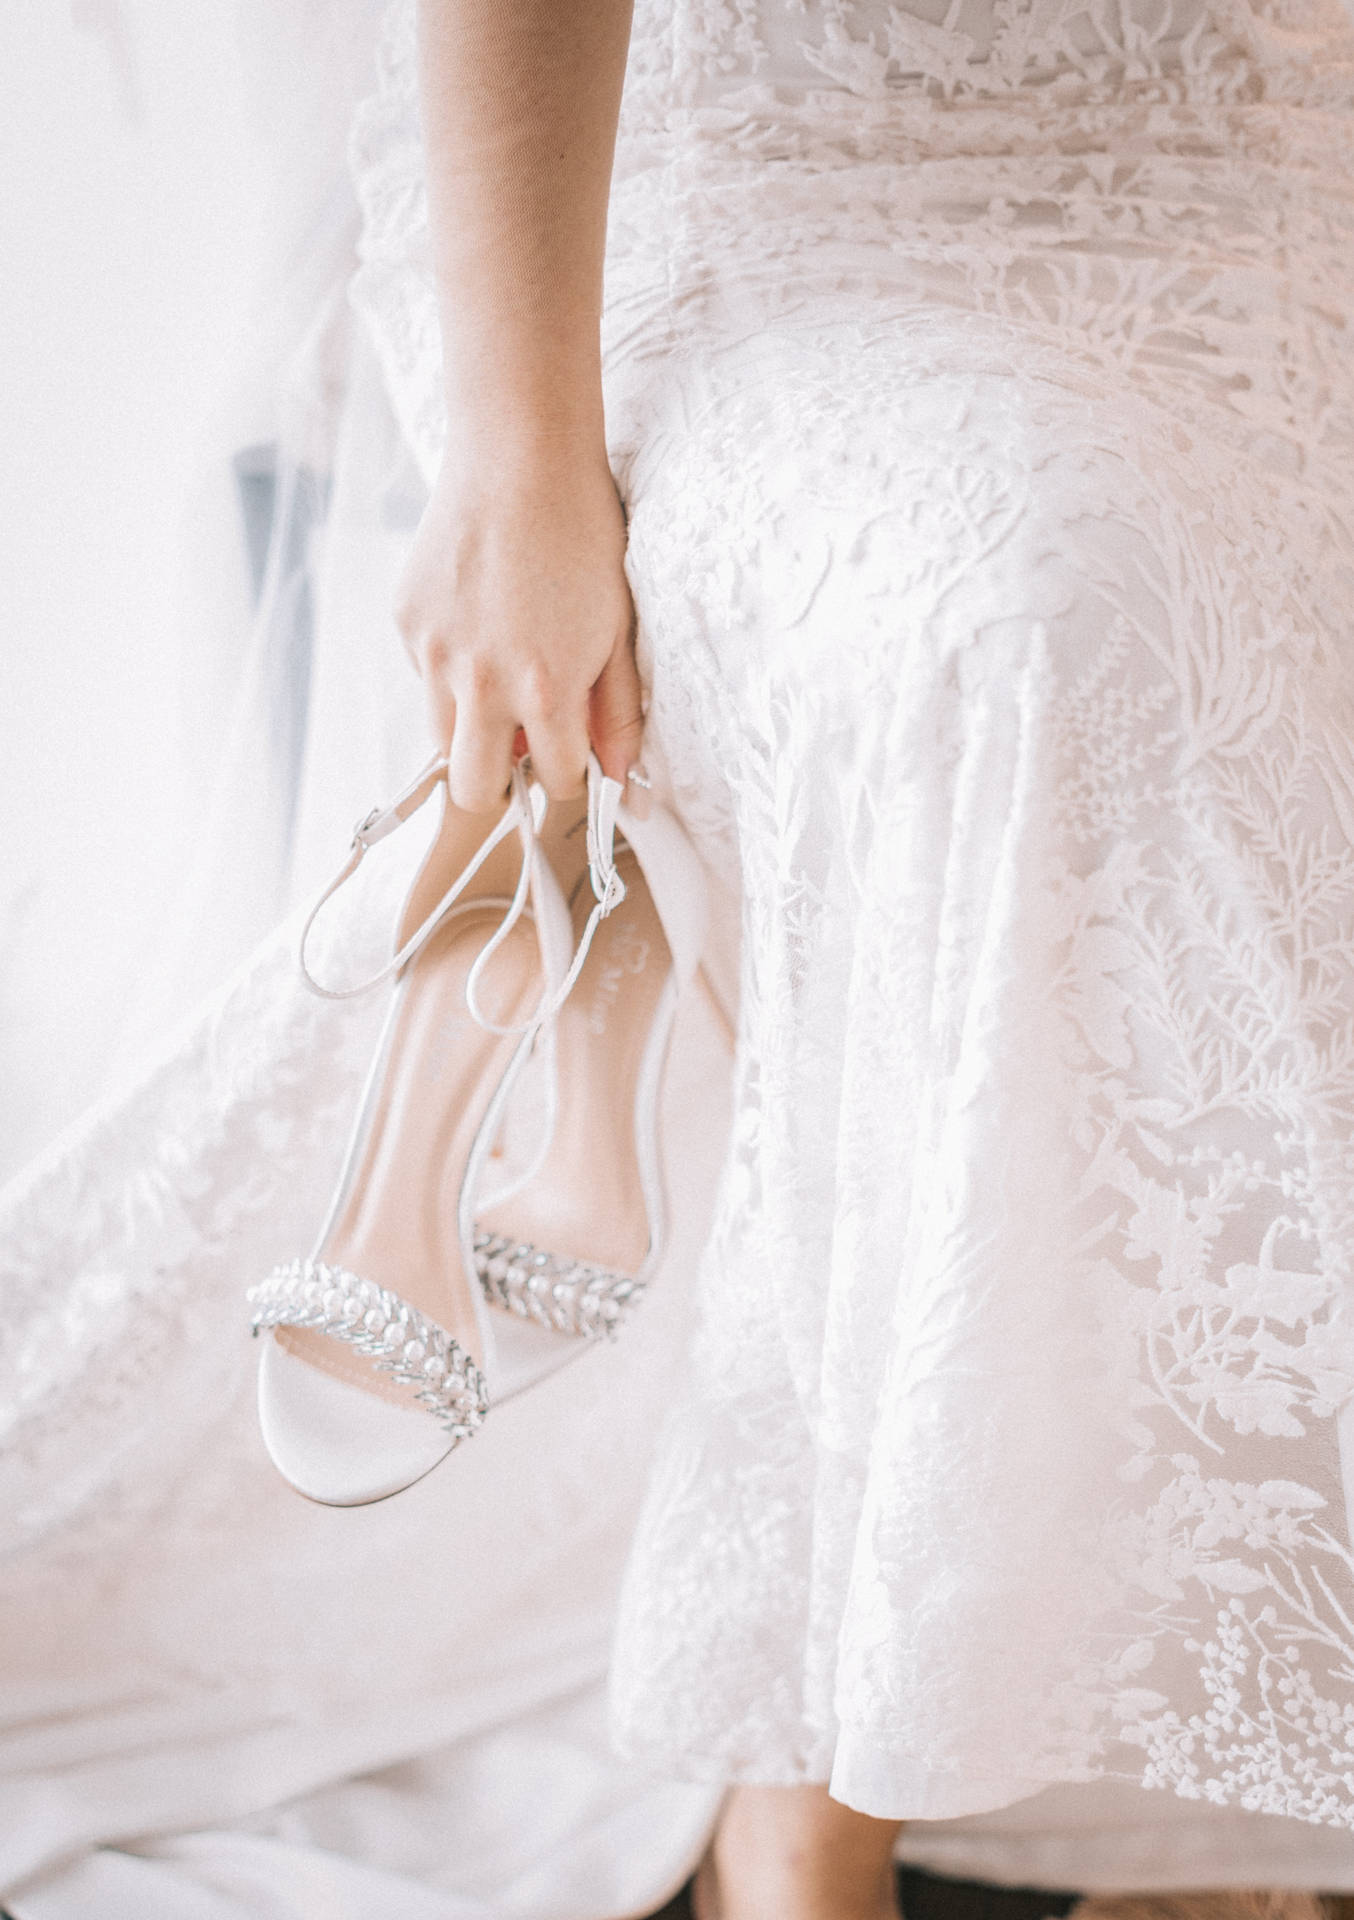 Carrying Bridal Shoes Wallpaper